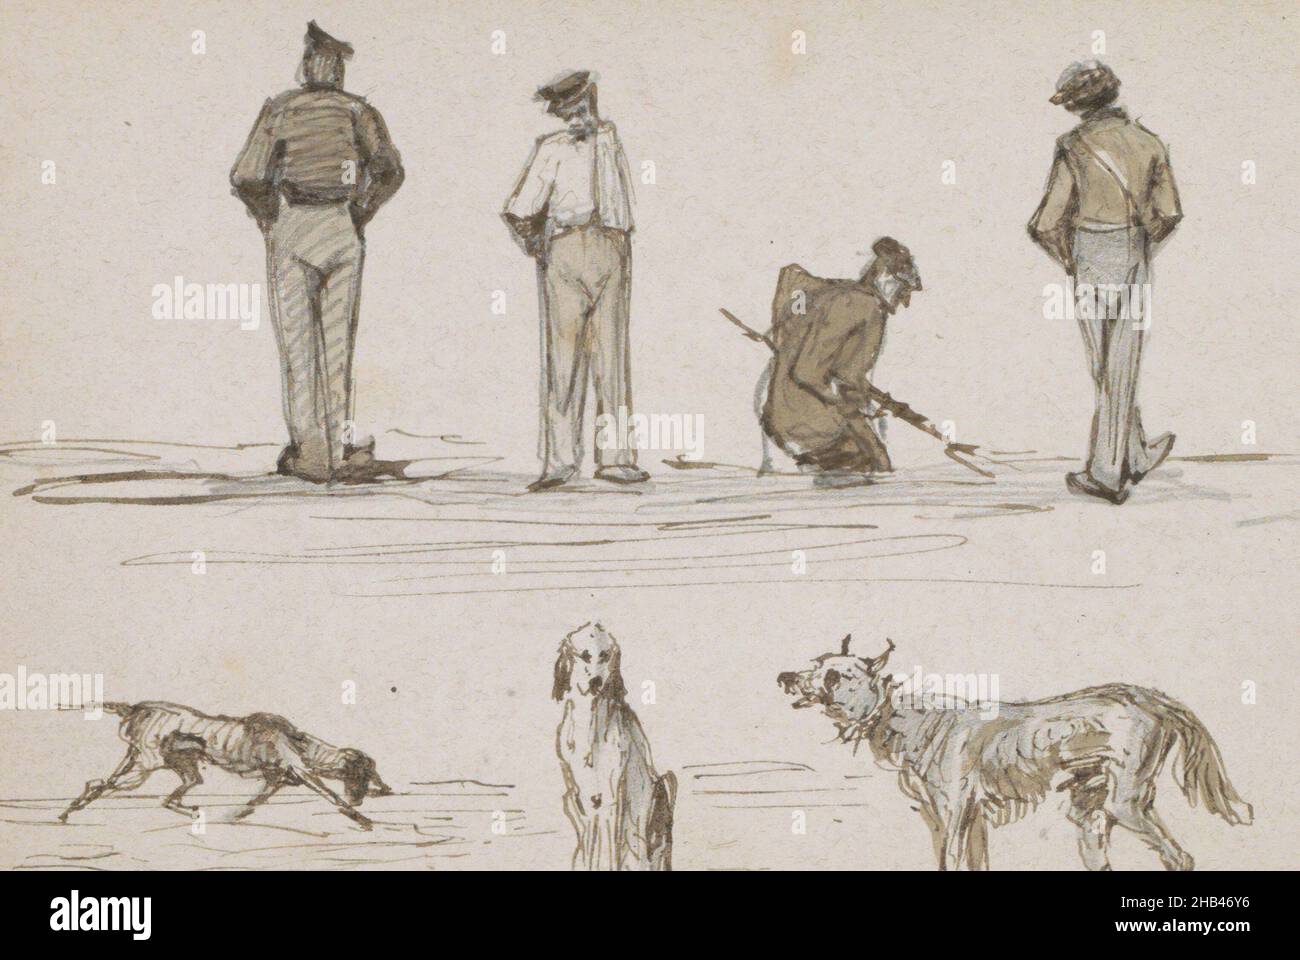 Sheet 14 verso from a sketchbook with 65 sheets, Three standing and one squatting man and three dogs, Johannes Tavenraat, 1862 - c. 1864 Stock Photo